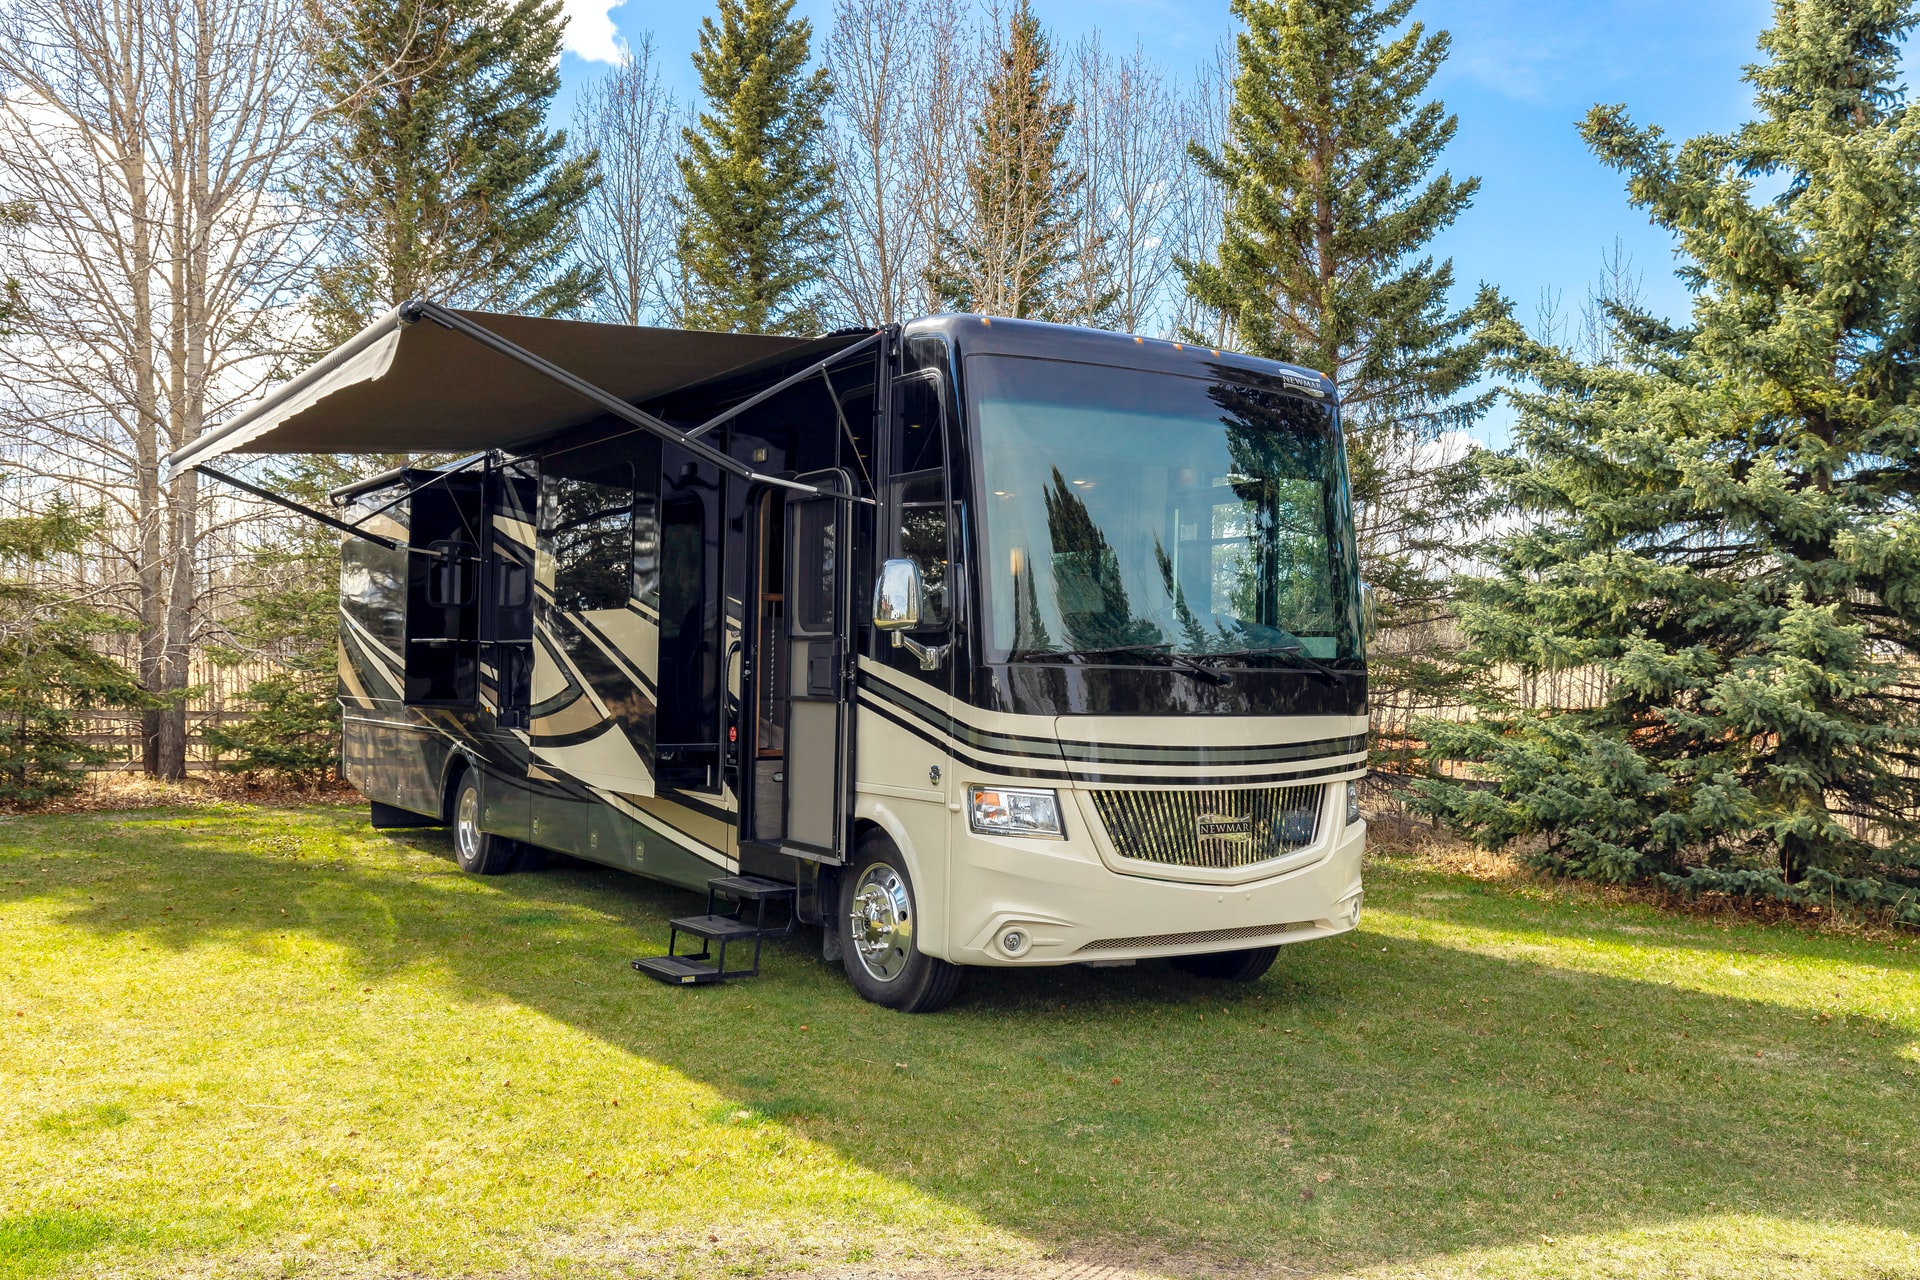 Can You Level RV With Slides Out?